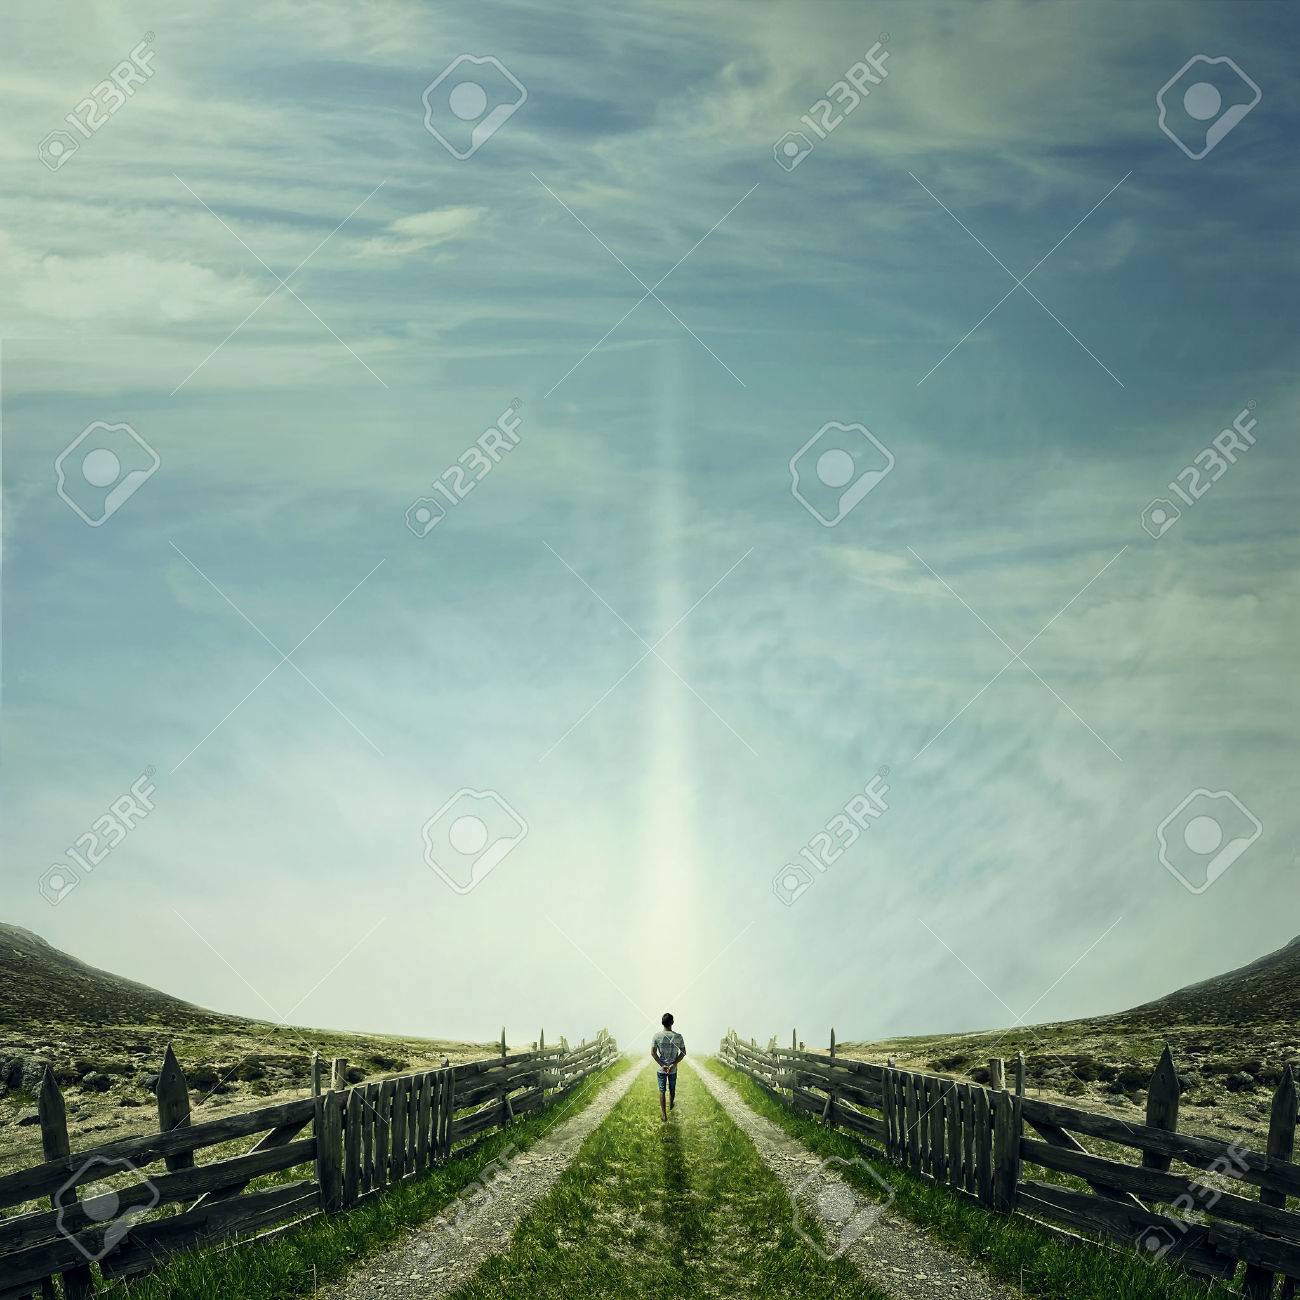 65313788-man-walking-on-a-country-road-with-a-relax-mood-following-a-light-way-of-life-concept.jpg